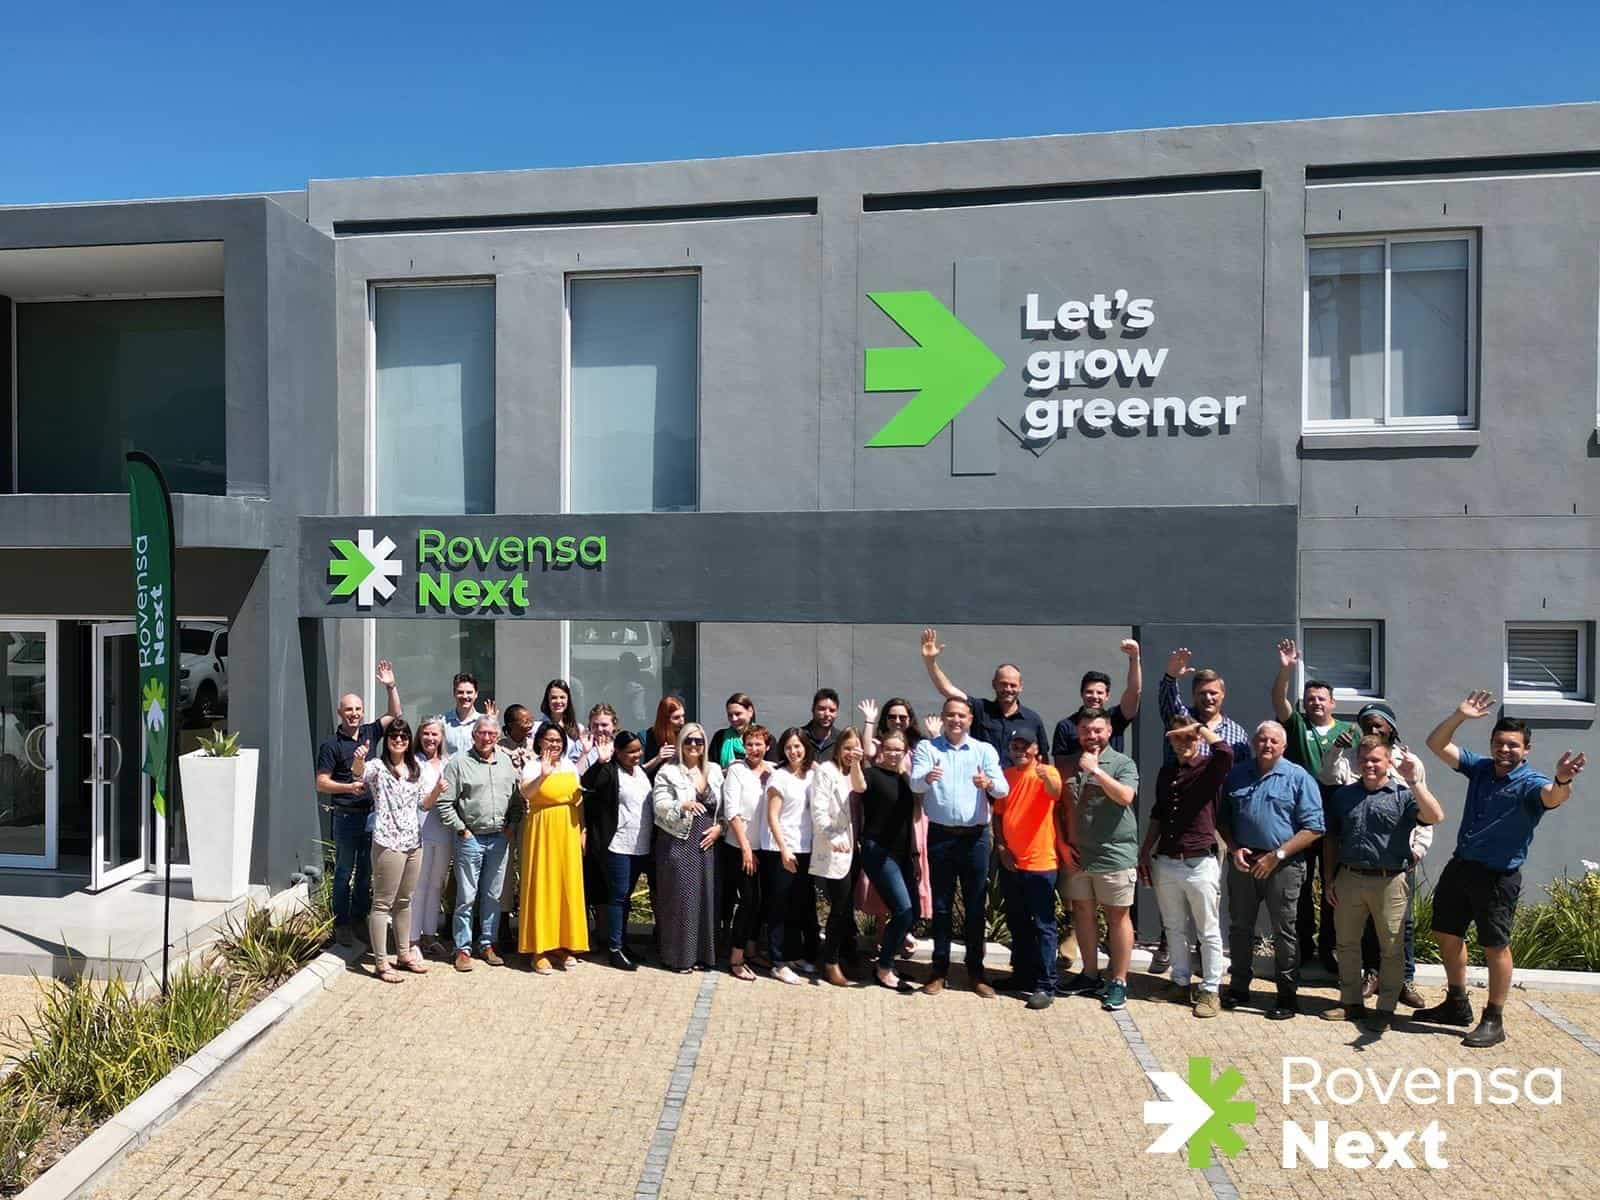 The local inhouse team in the town of Strand celebrated the rebranding of Rovensa Next Sub-Saharan Africa factory and offices 